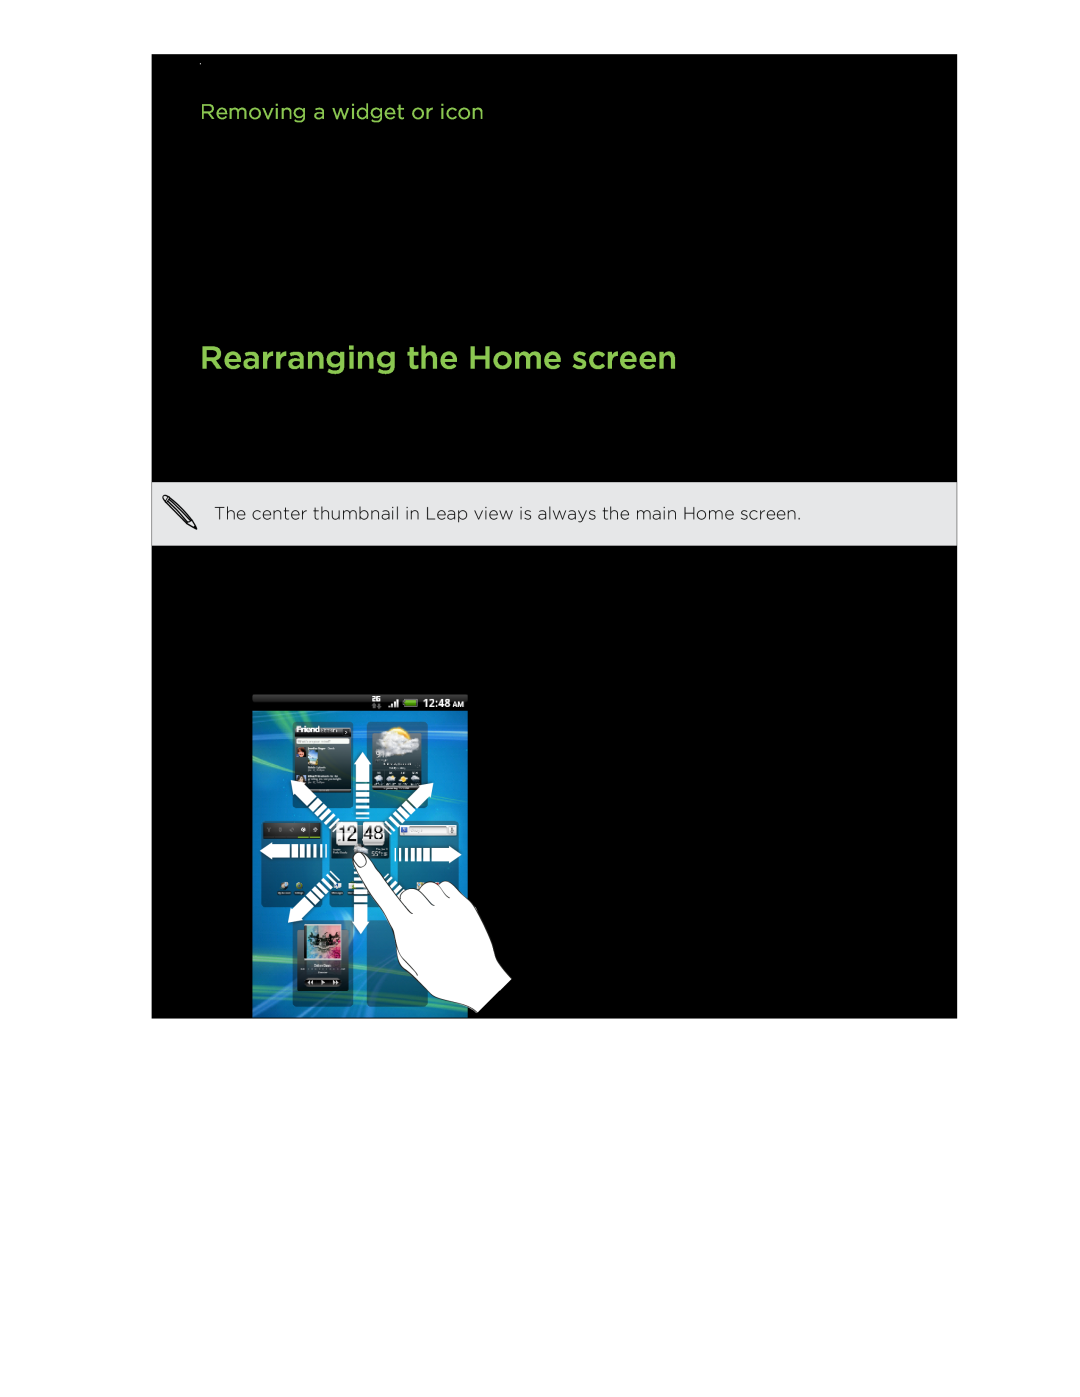 HTC S manual Rearranging the Home screen, Removing a widget or icon 